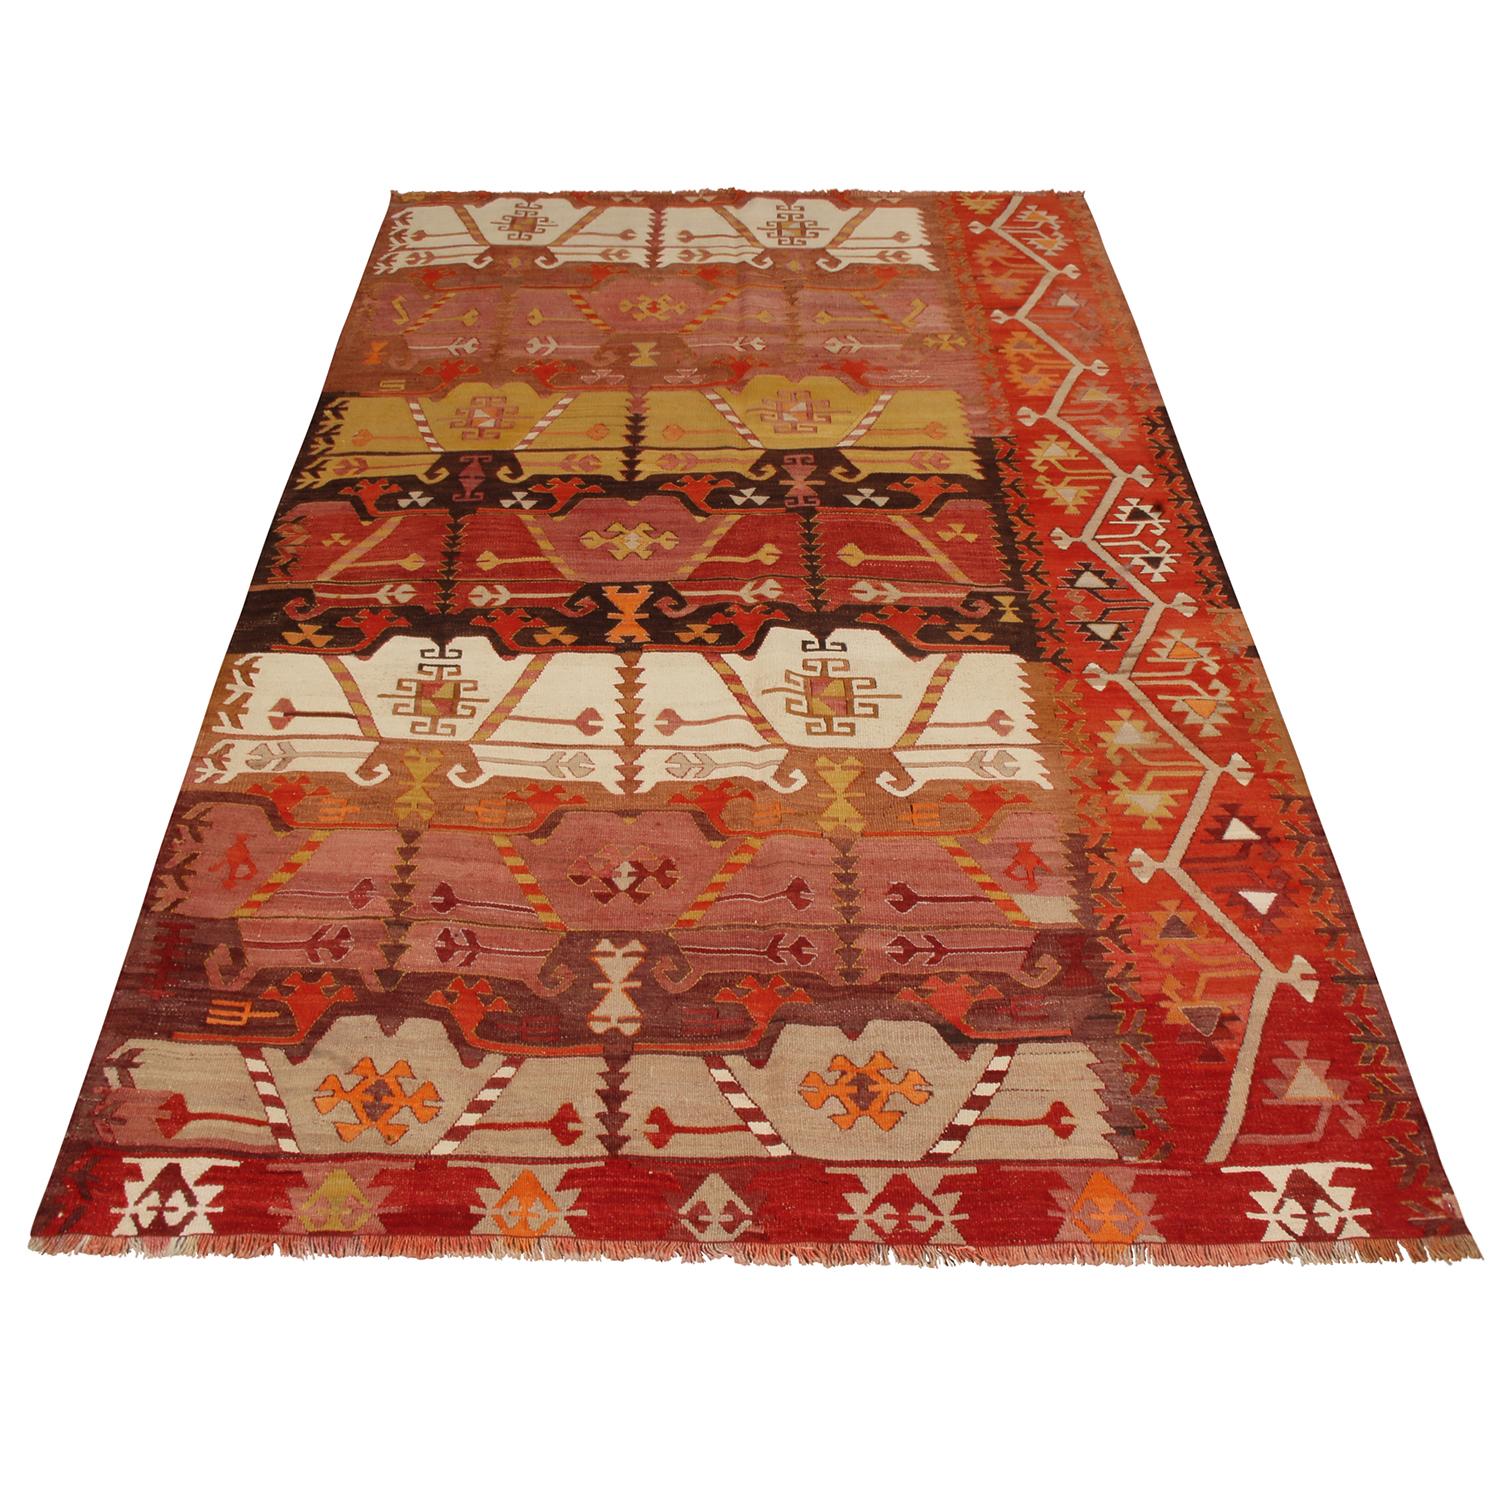 Flat-woven in high-quality wool originating from Turkey between 1940-1950, this vintage Emirdag Kilim rug stands apart from similarly ornate pieces of its family and era for the mixed-symmetry field design, departing from a traditional sense of